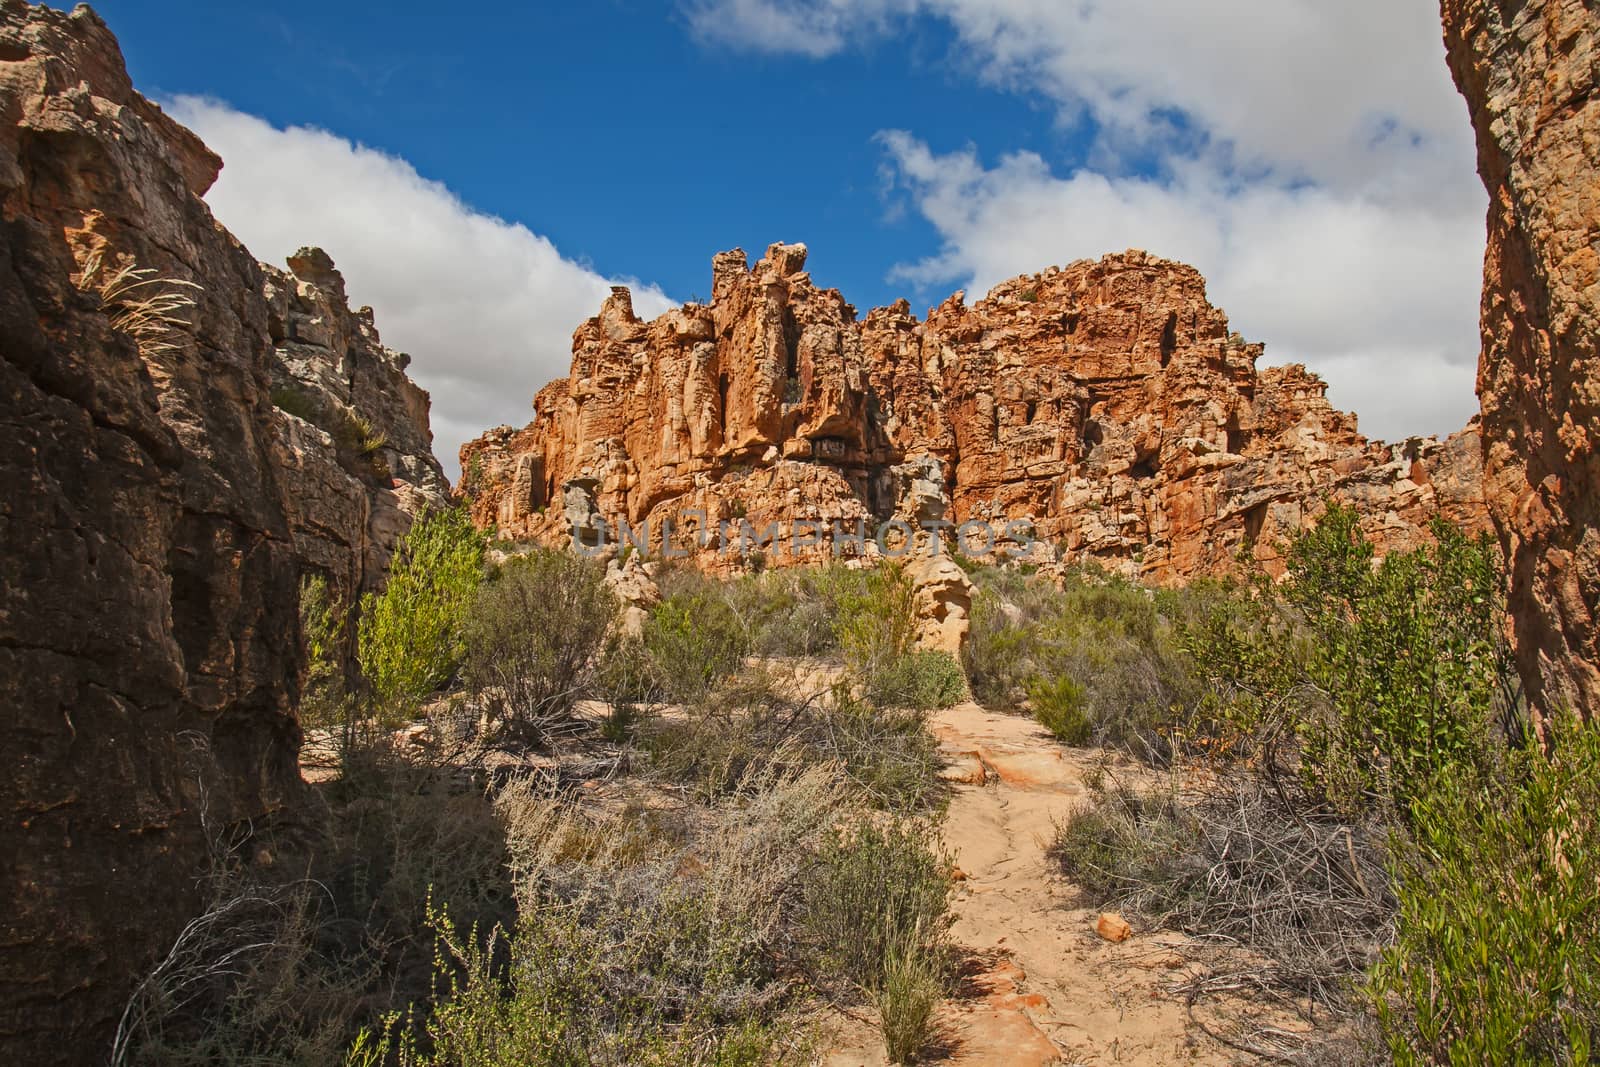 A scene of highly eroded sandstone formations in the Cederberg Wilderness Area, Western Cape. South Africa